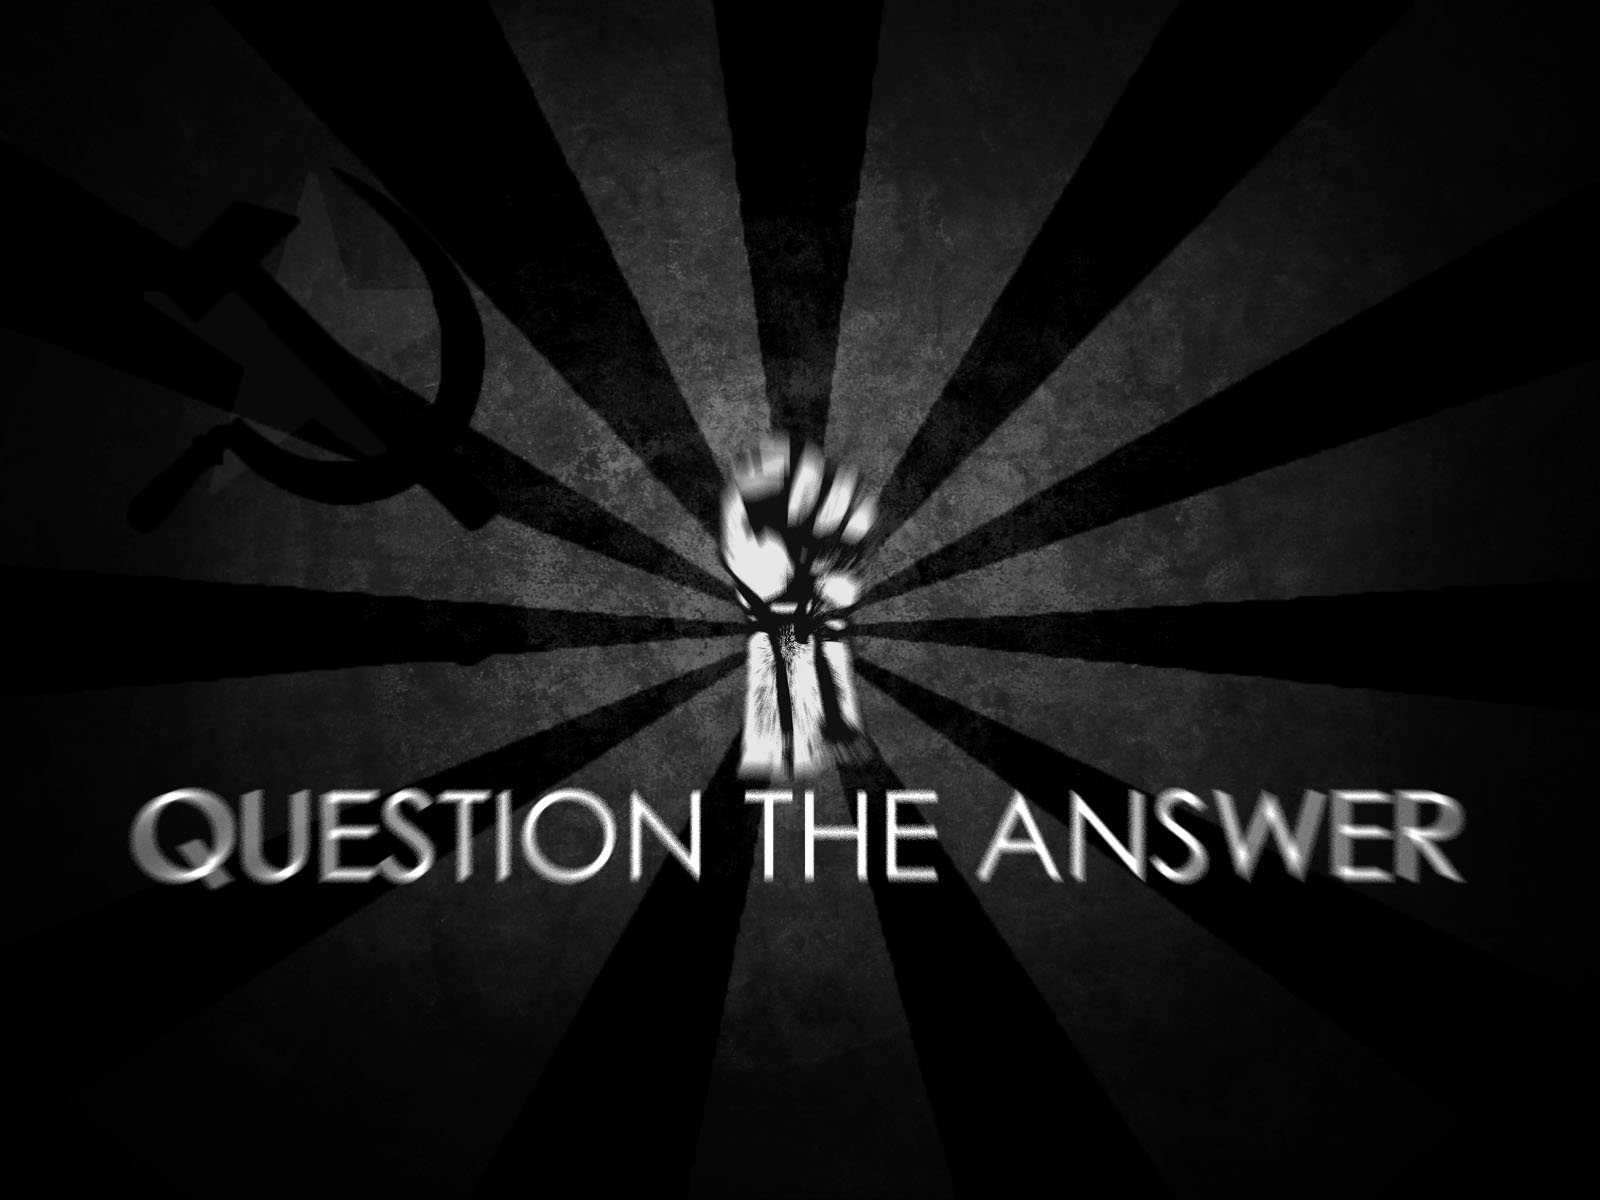 communism, Text, Fists, Grayscale, The, Question Wallpaper